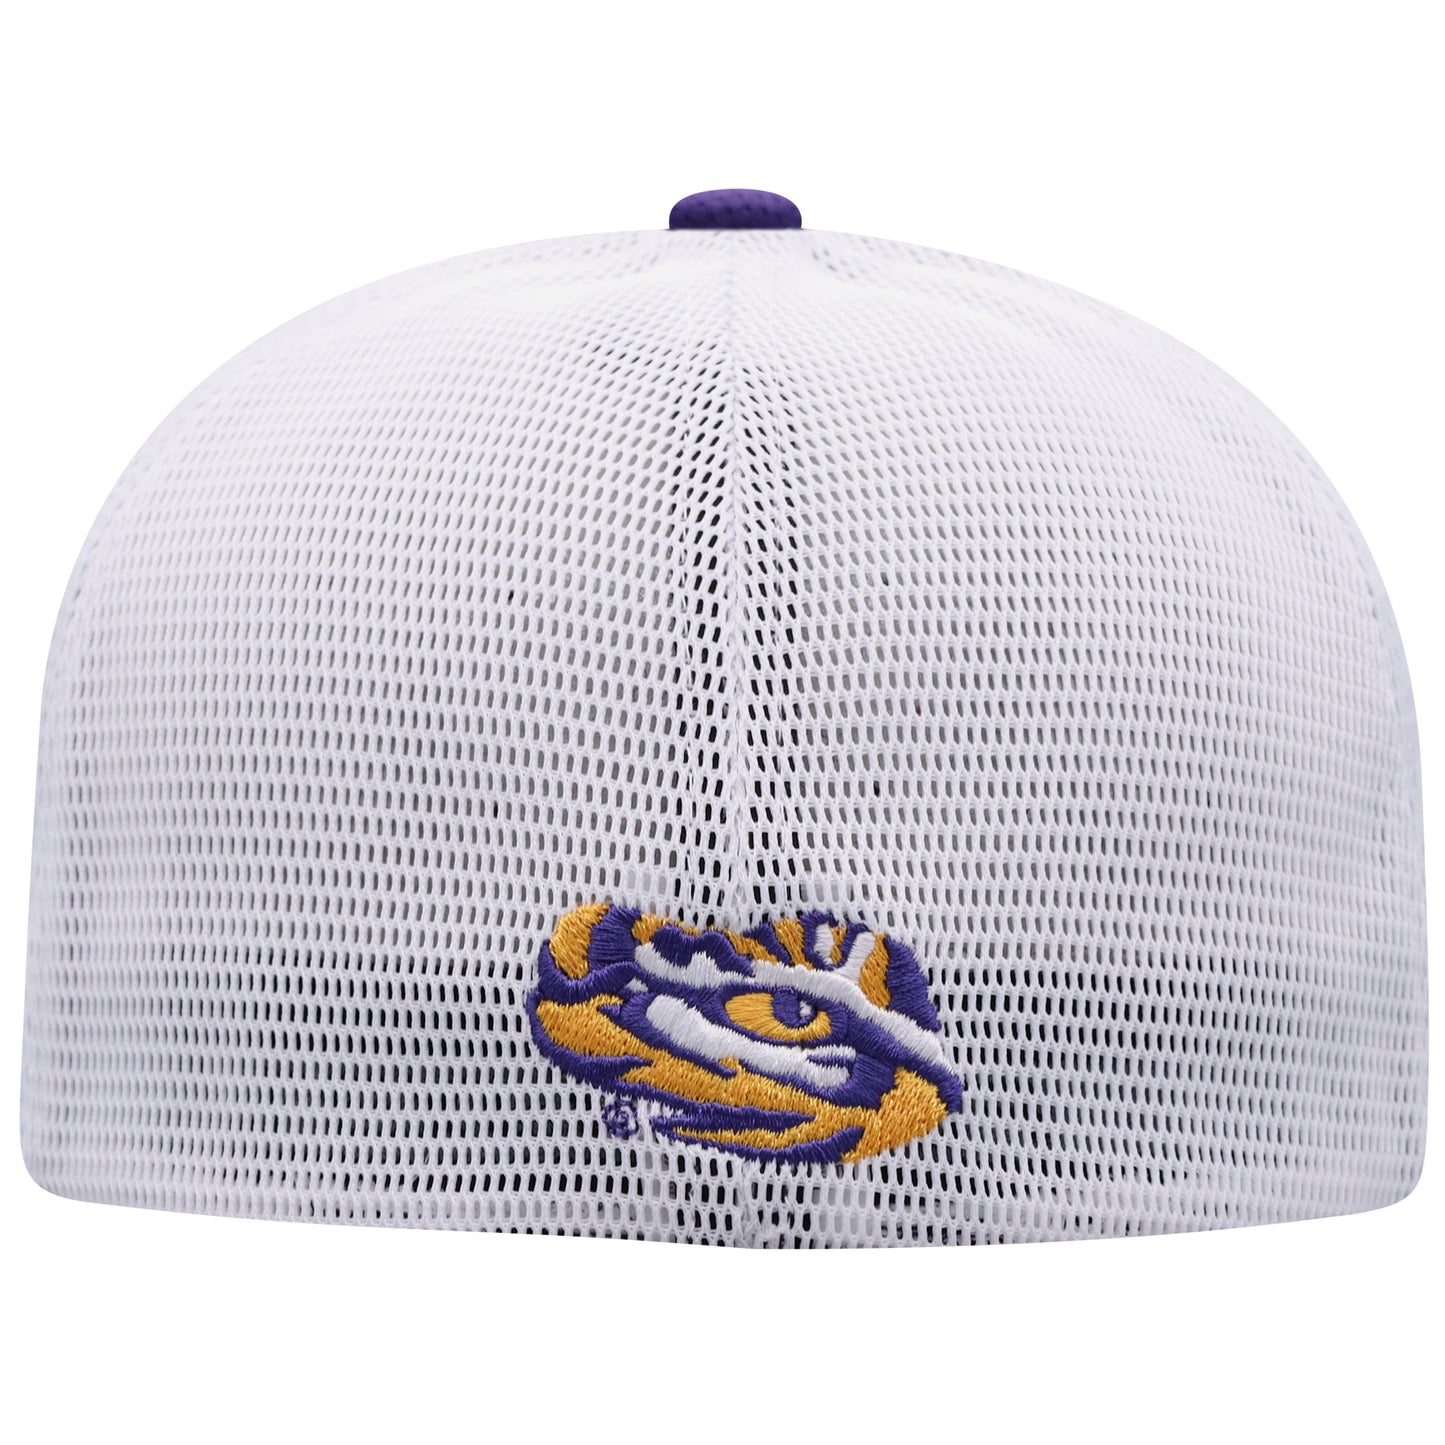 Men's LSU Tigers Stamp 3-Tone Flex Fit Hat By Top Of the World